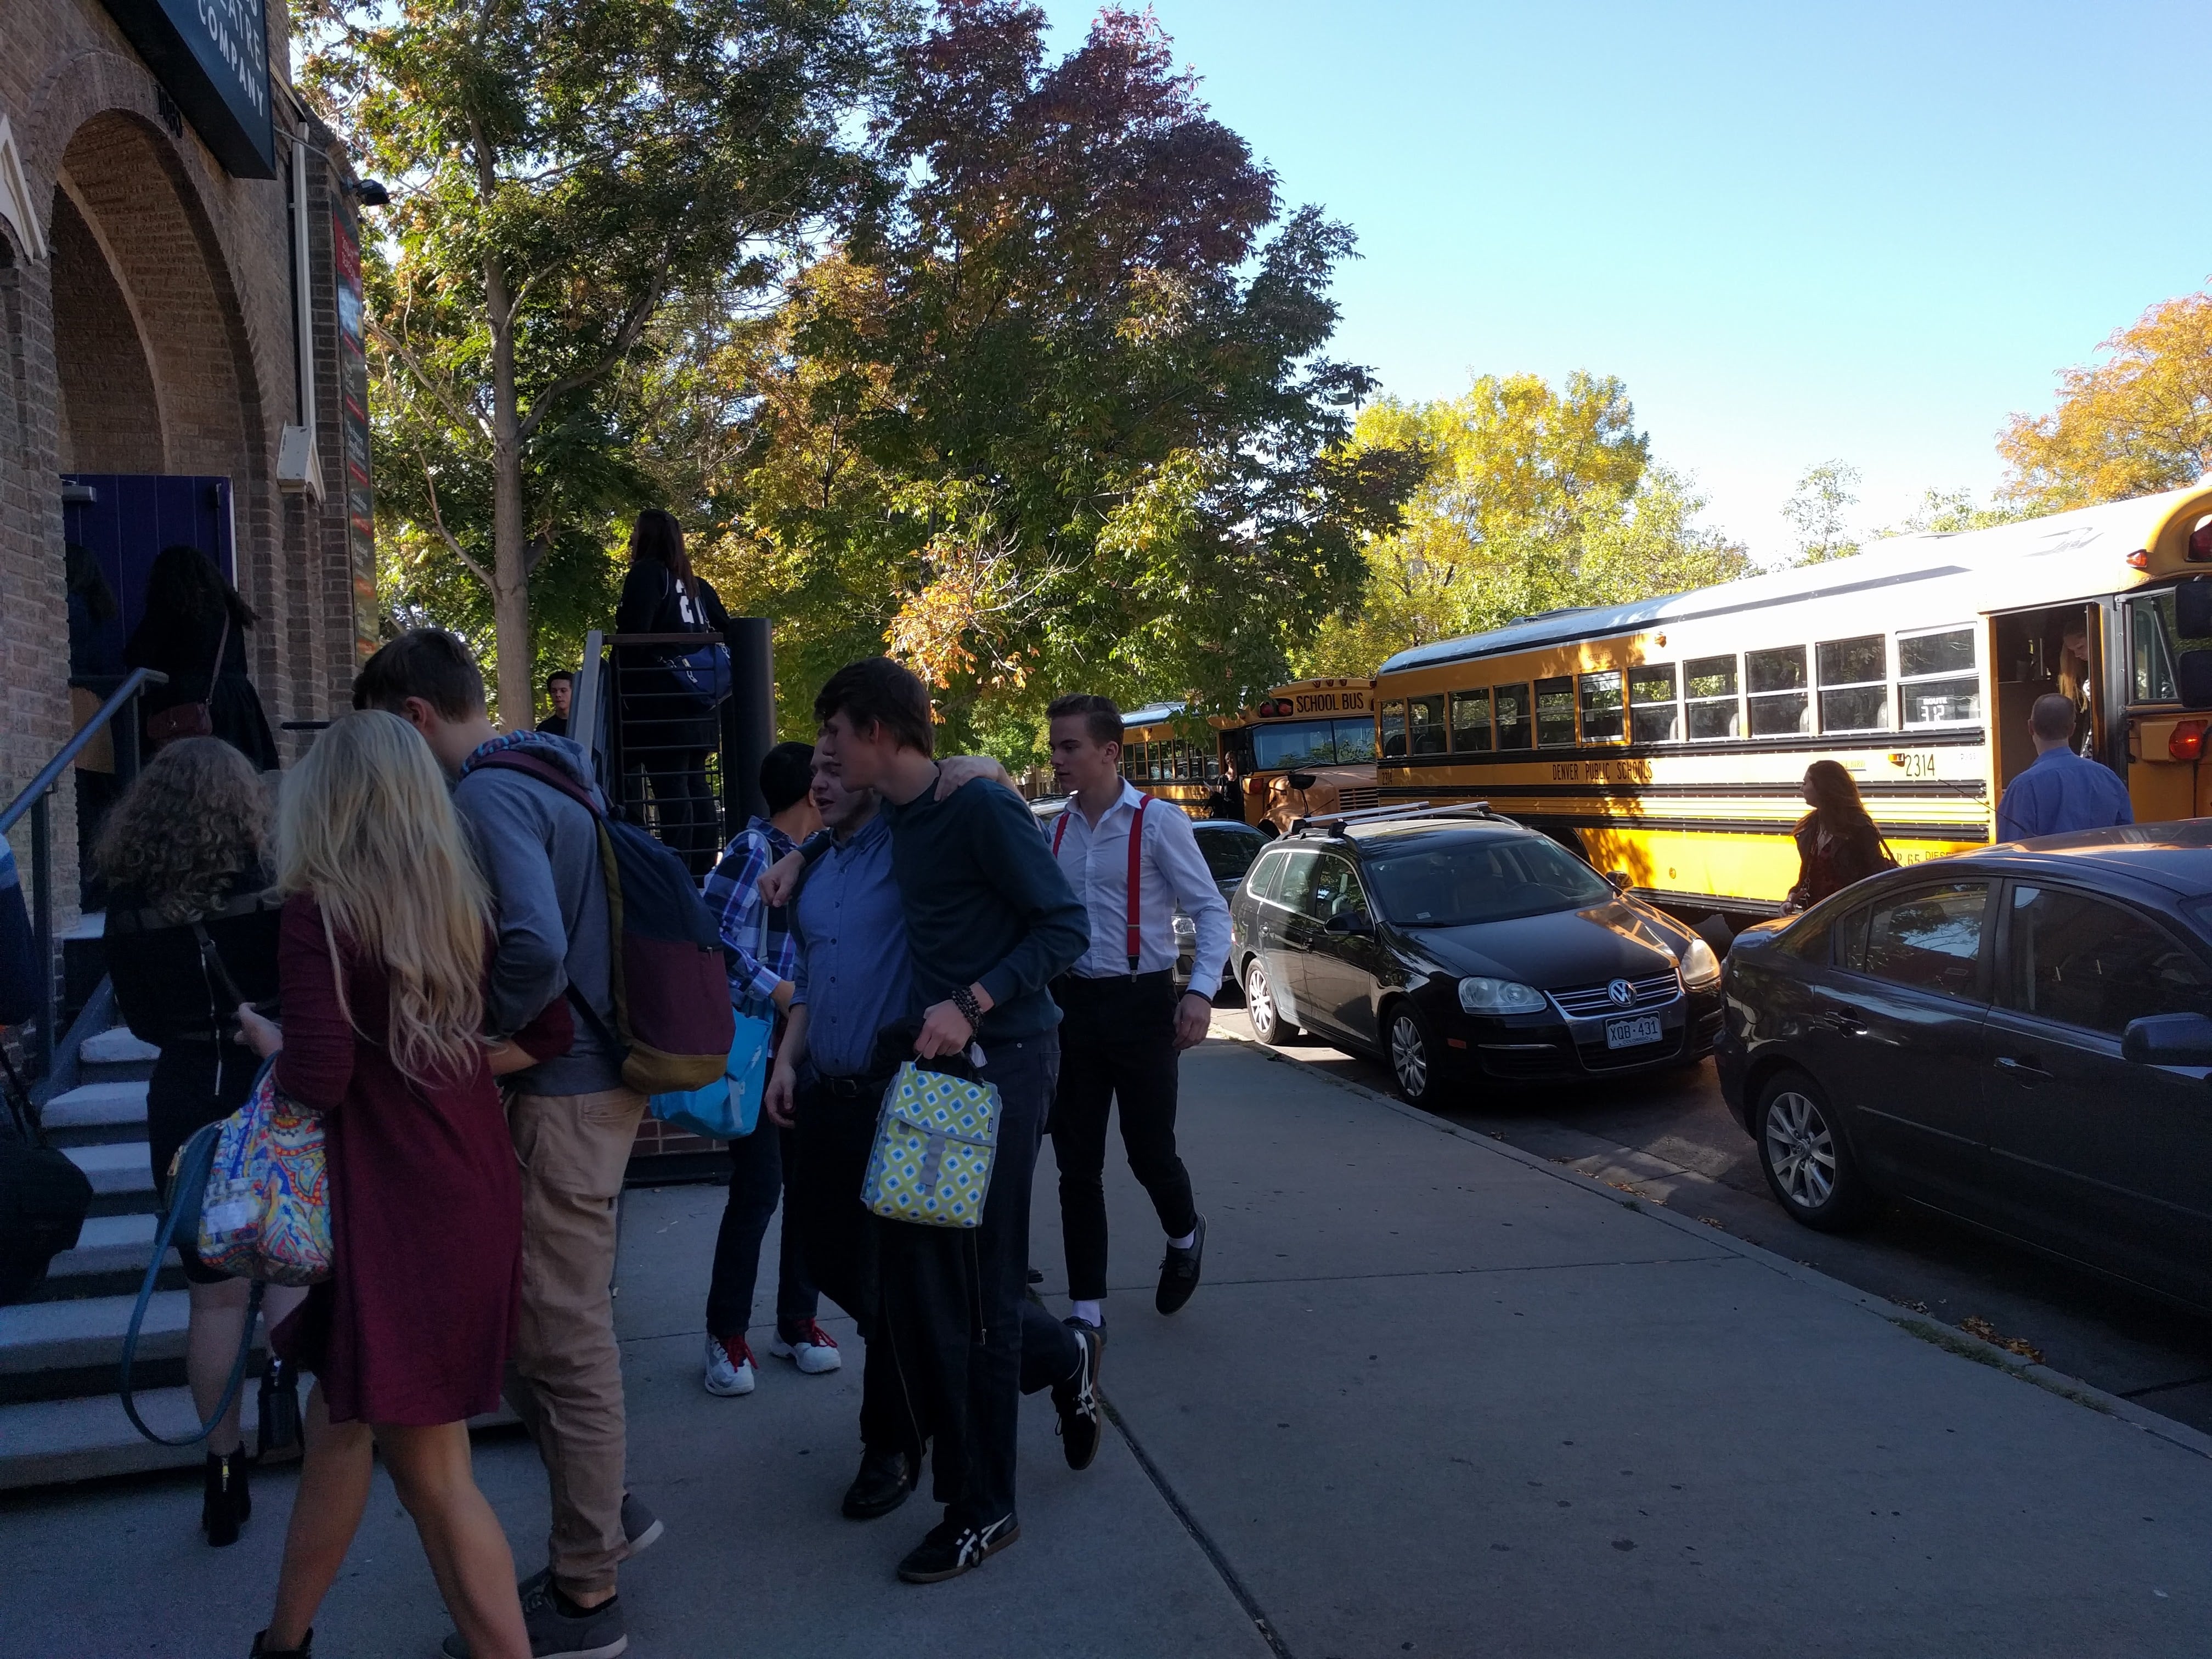 A crowd of students walk into the Curious Theatre building on a bright, sunny day.